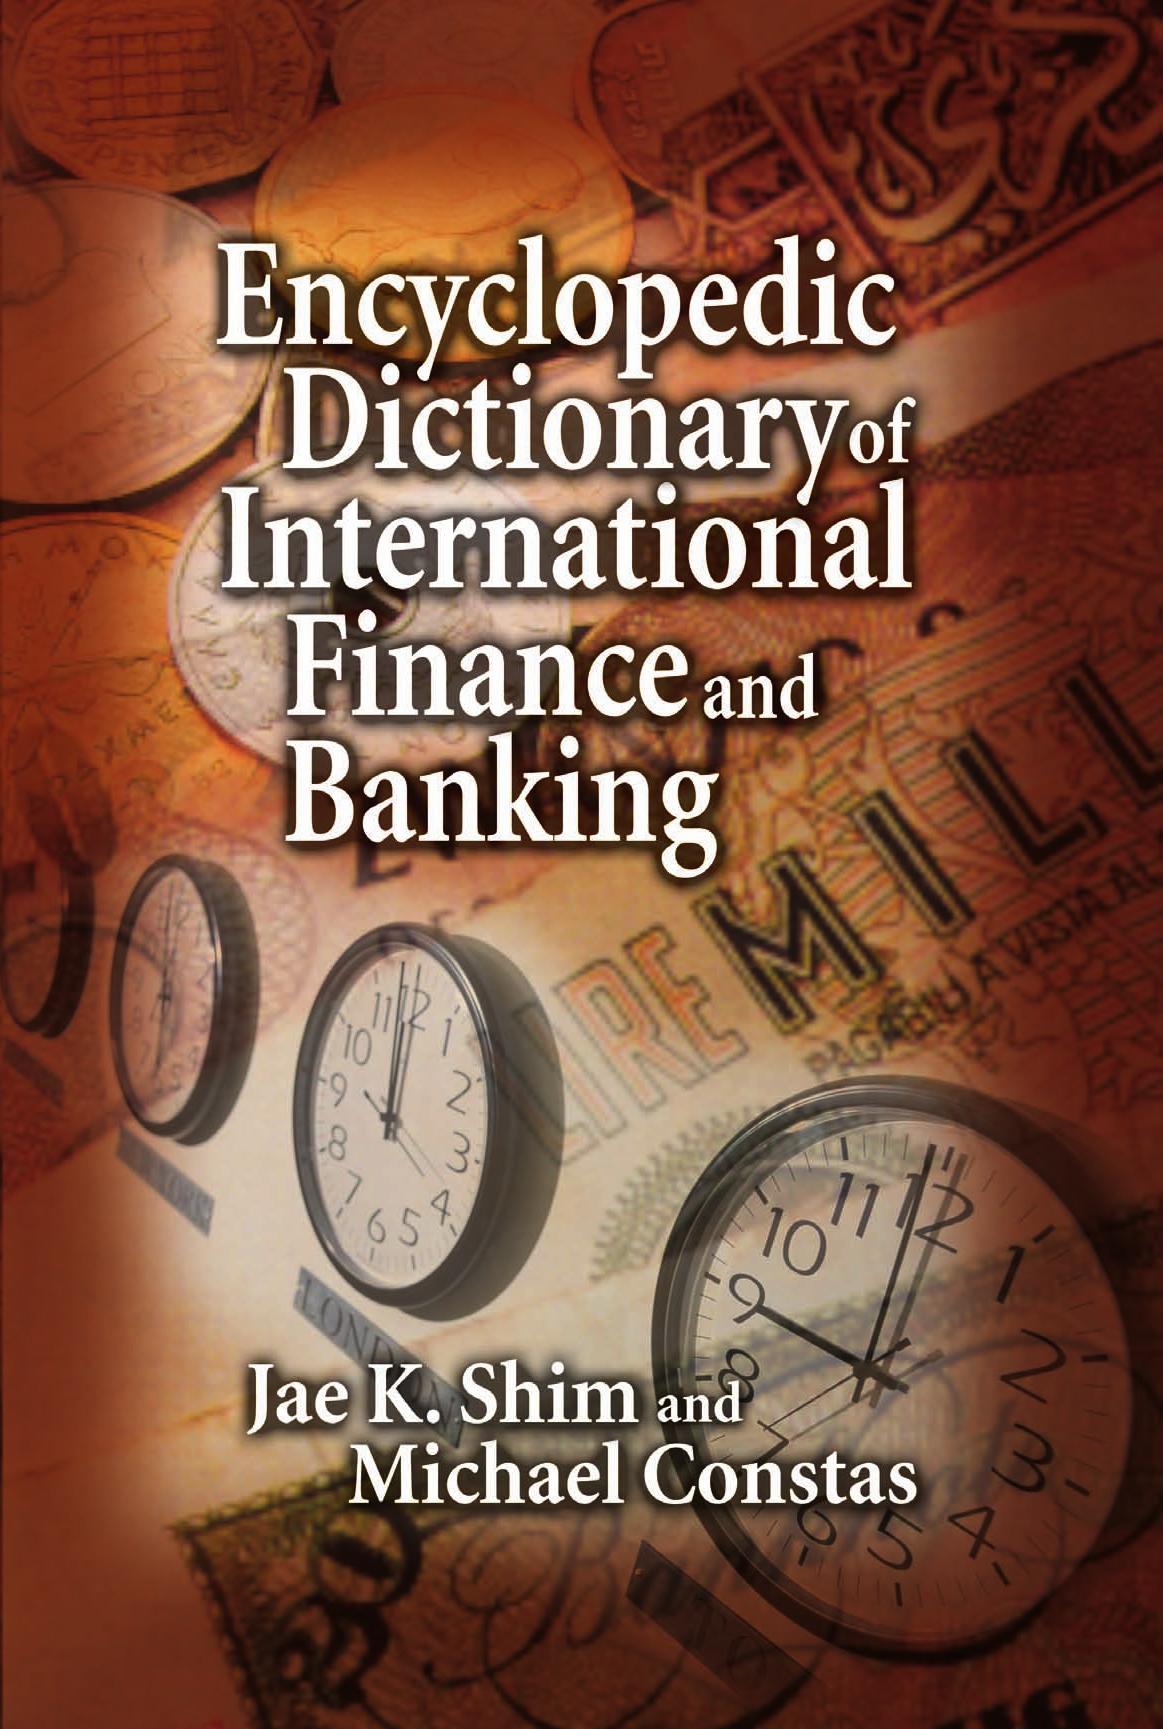 Internation Dictionary Of Finance And Banking